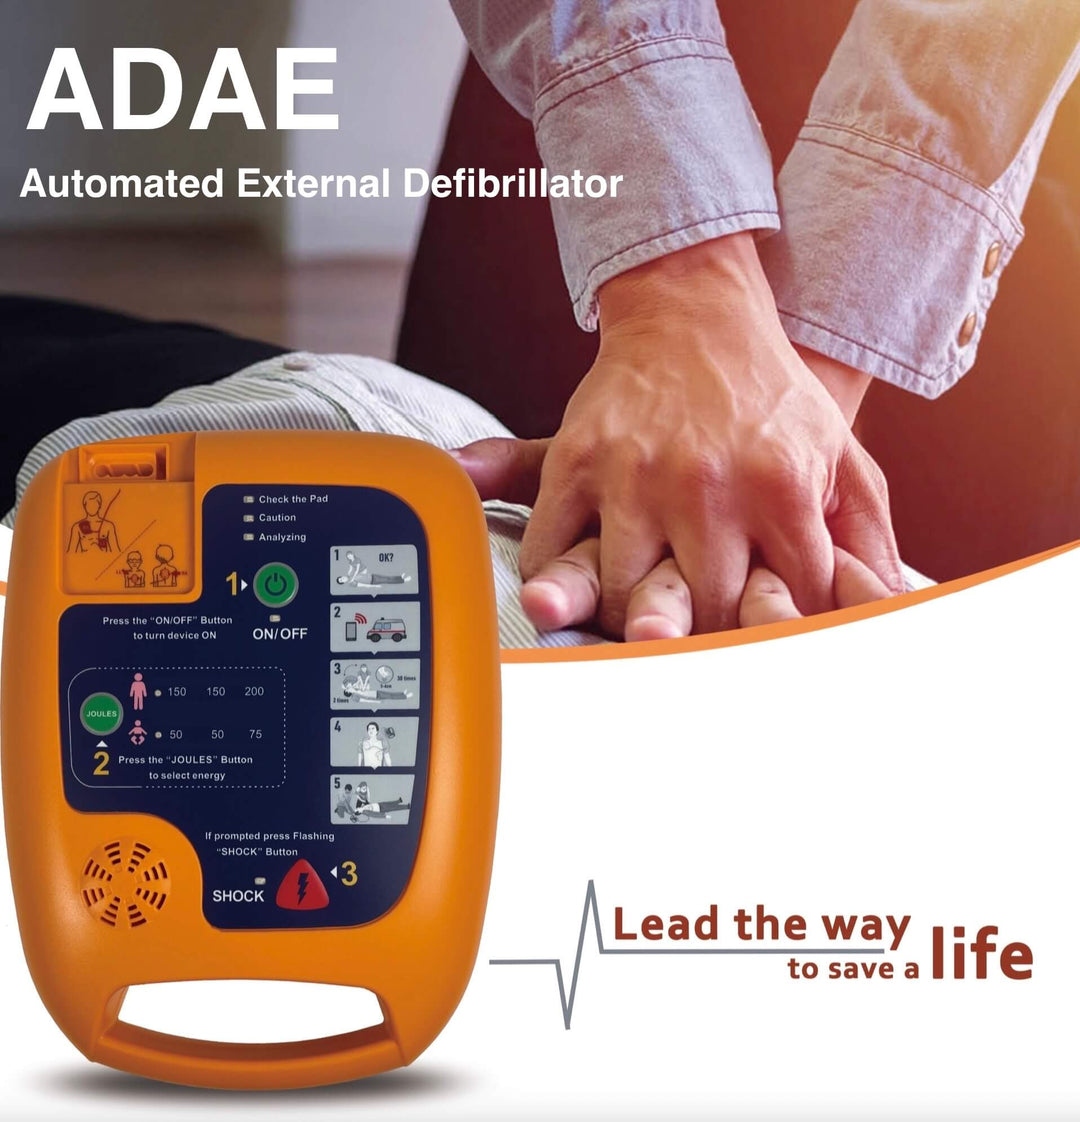 ADAE AED automated external defibrillator